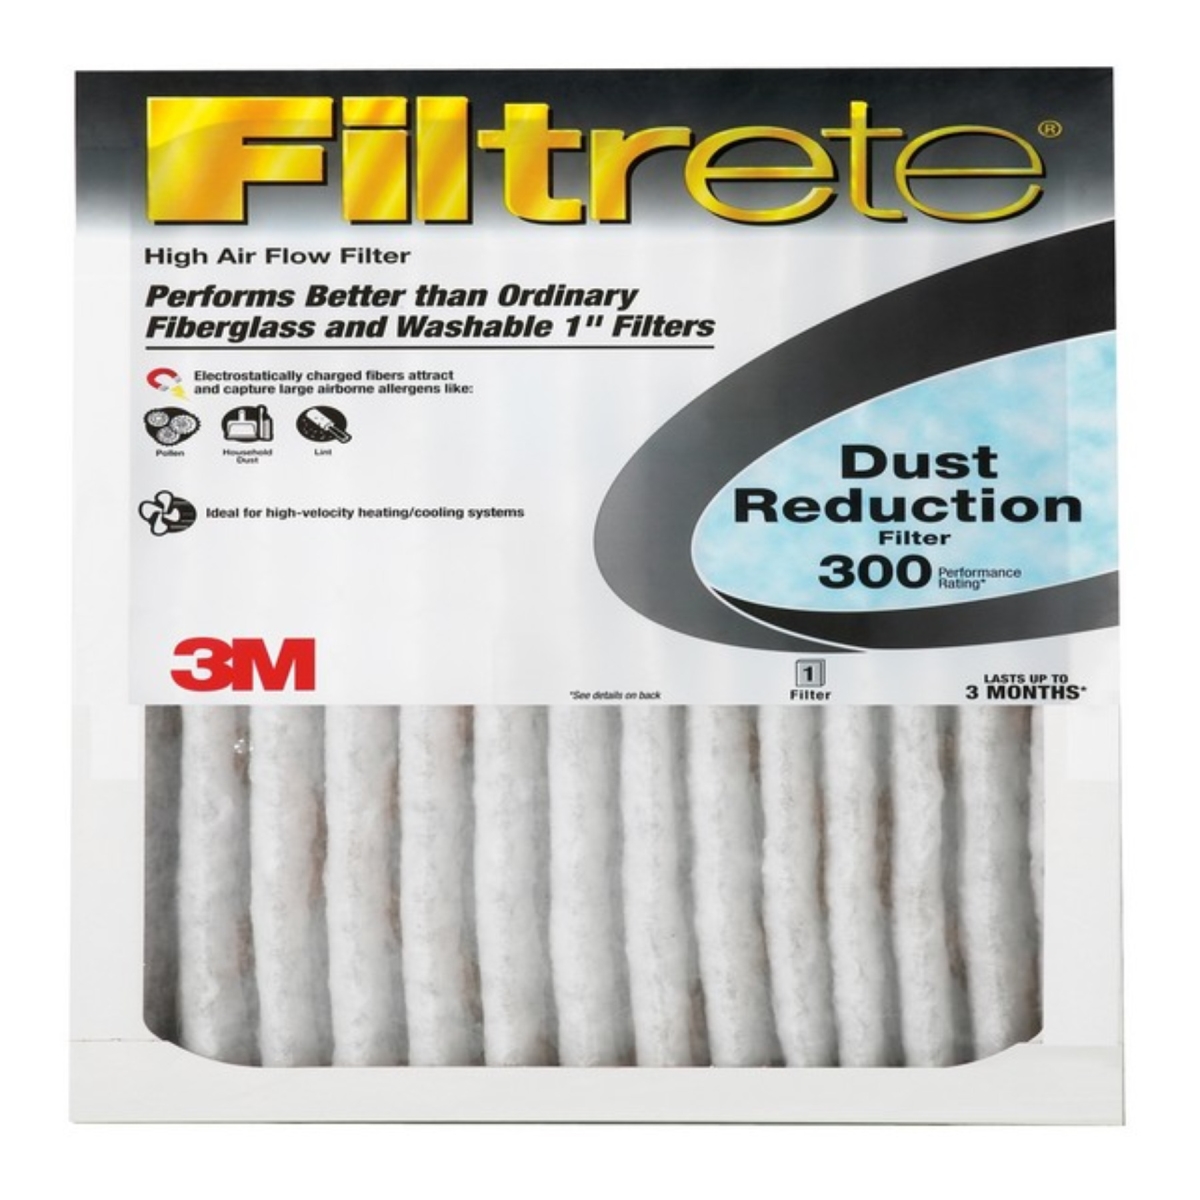 302dc-h-6 20 X 20 In. Filtrete Dust Reduction Filters - White, Pack Of 6